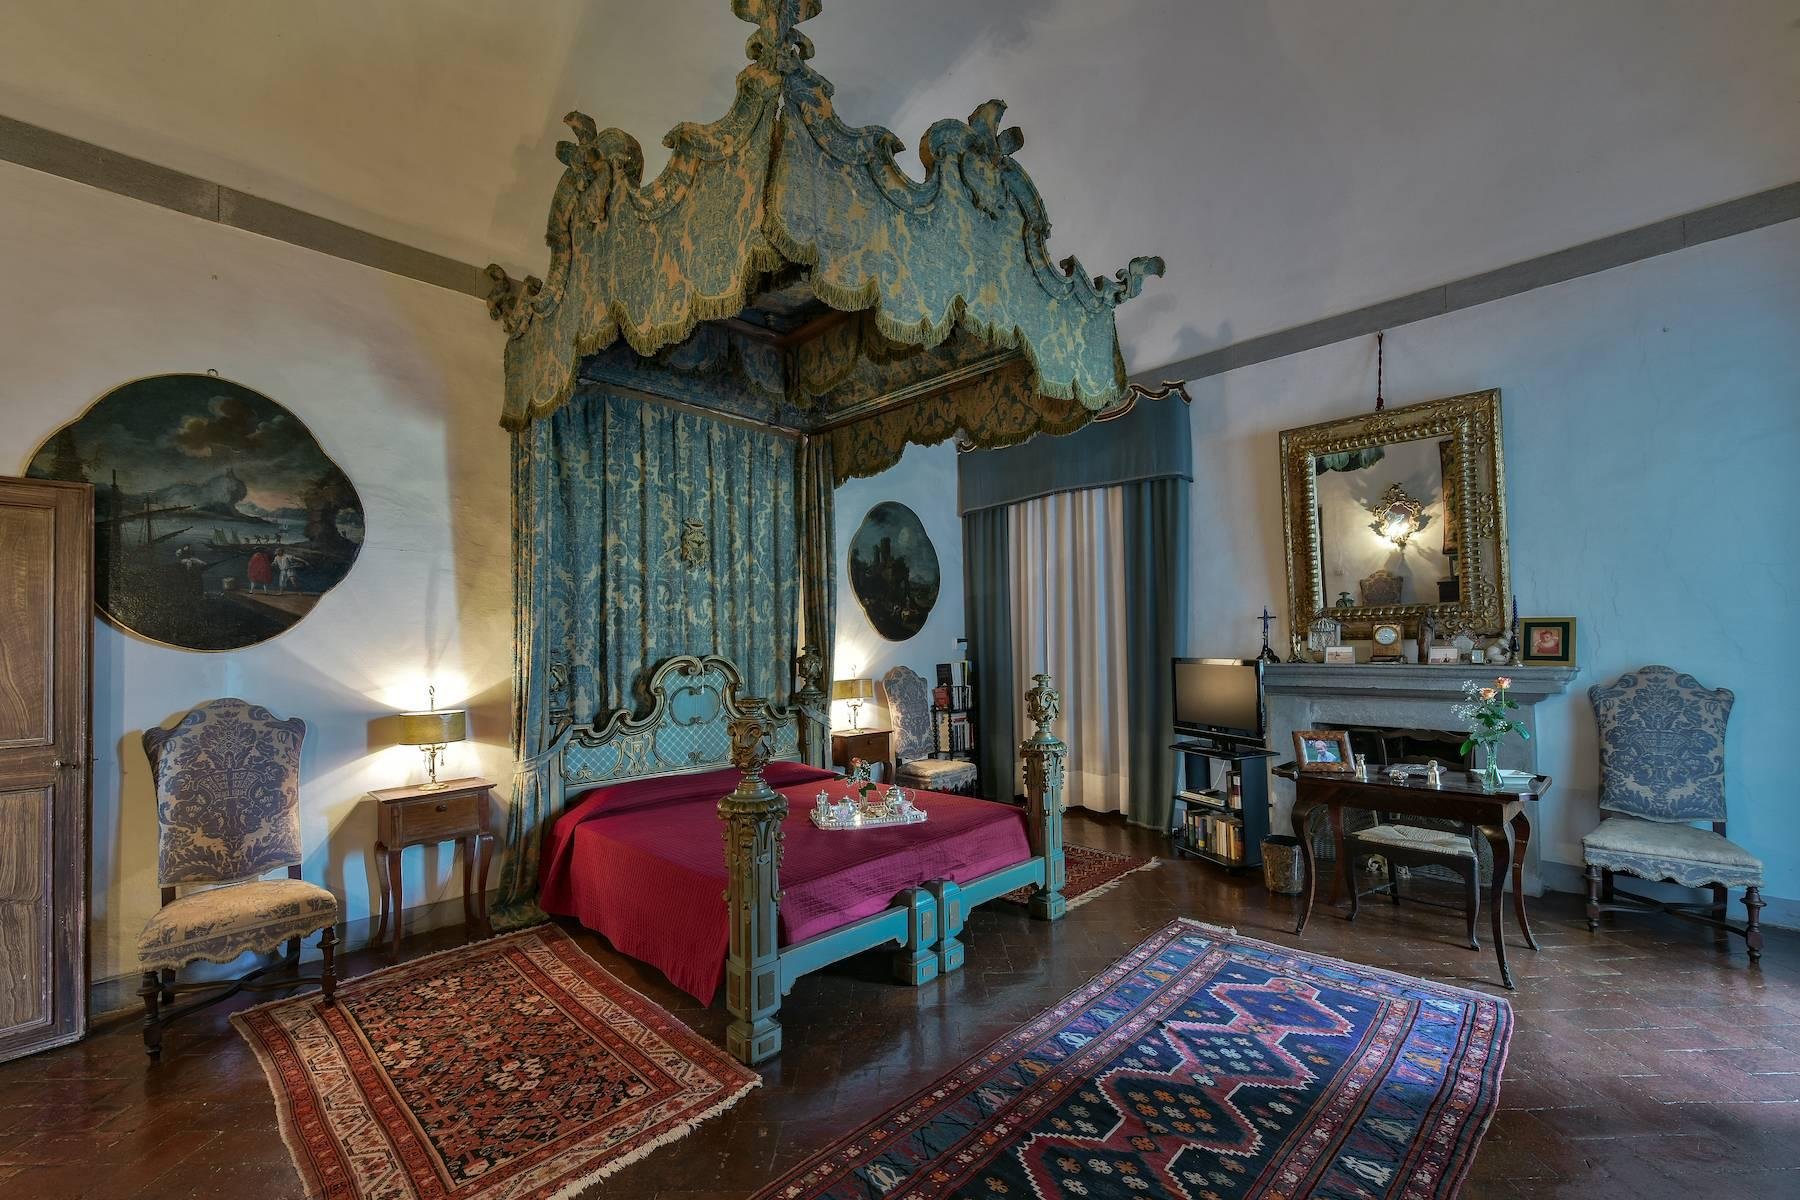 Francis York  Tuscan Villa Owned by Italian Aristocracy Available to Book as a Luxury Villa Rental 1.jpg